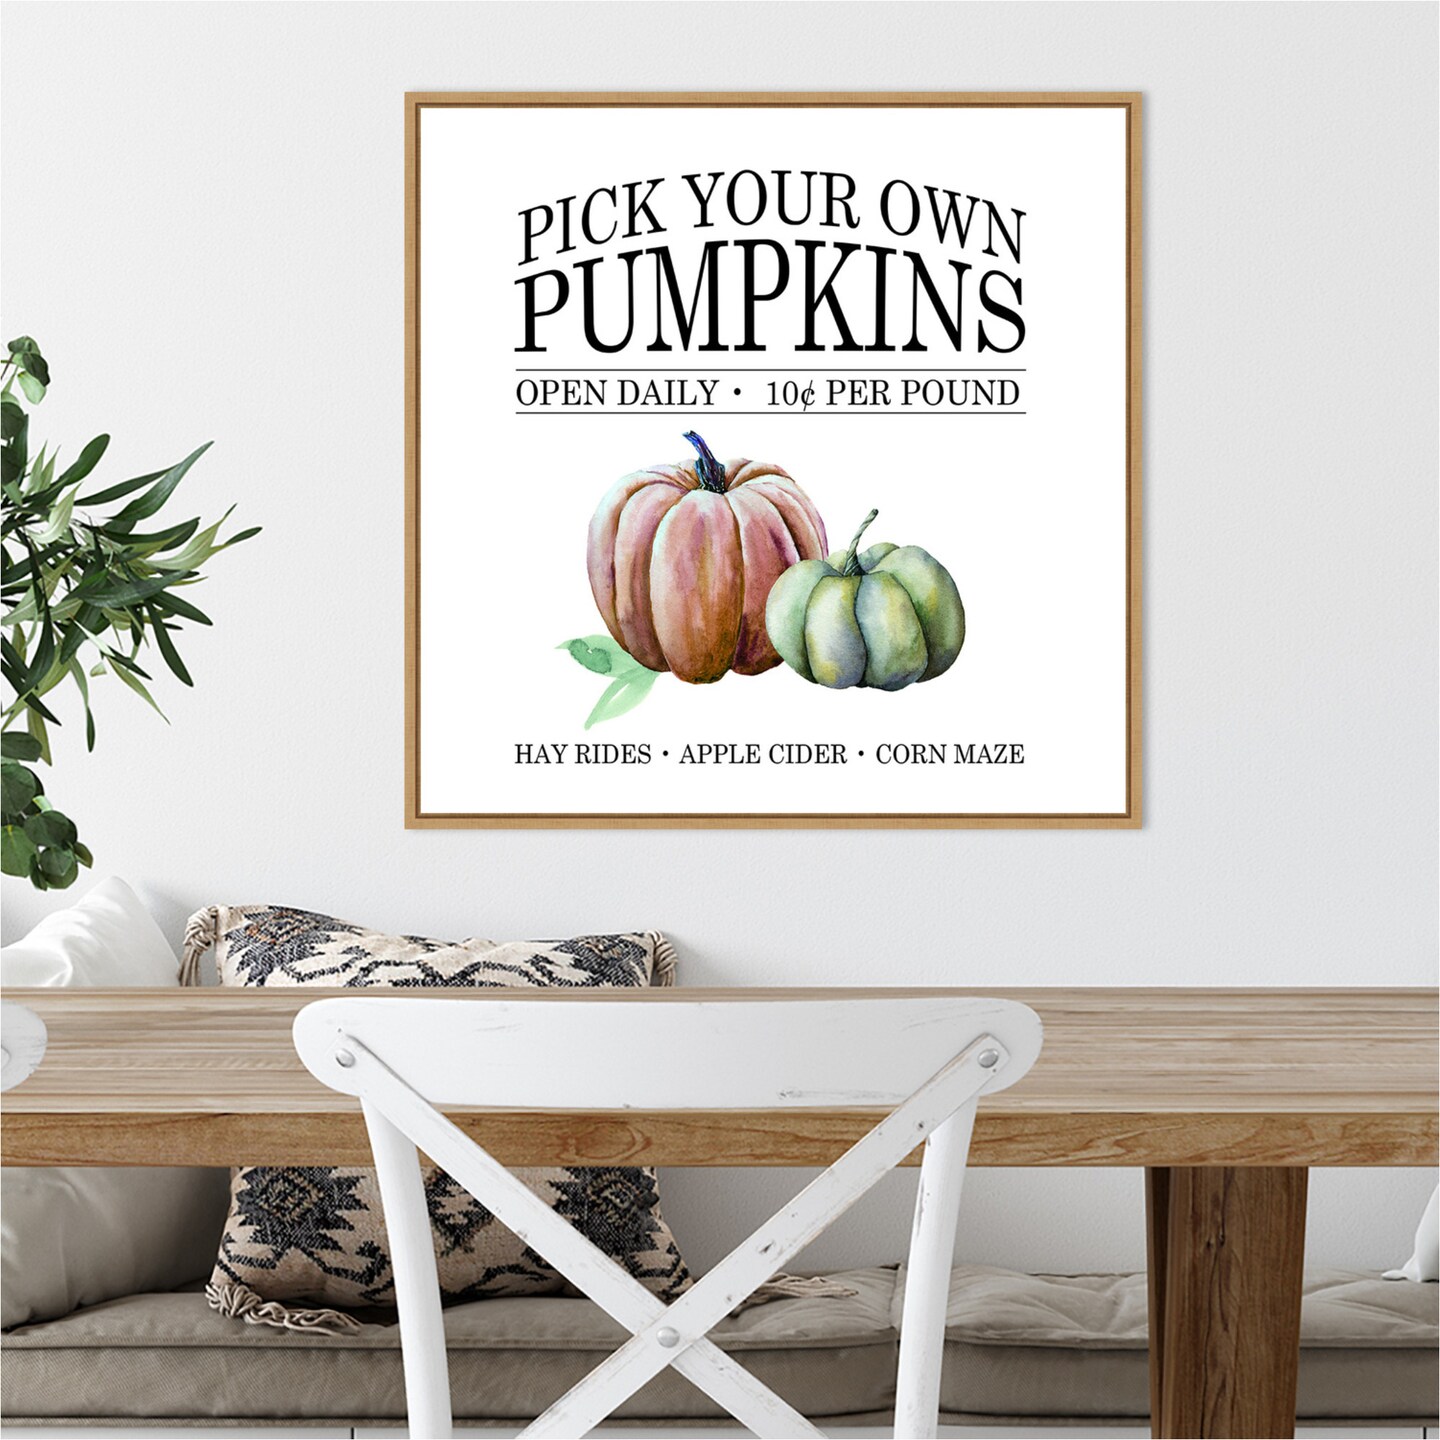 Pick Your Own Pumpkins by Amanti Art Portfolio 22-in. W x 22-in. H. Canvas Wall Art Print Framed in Natural